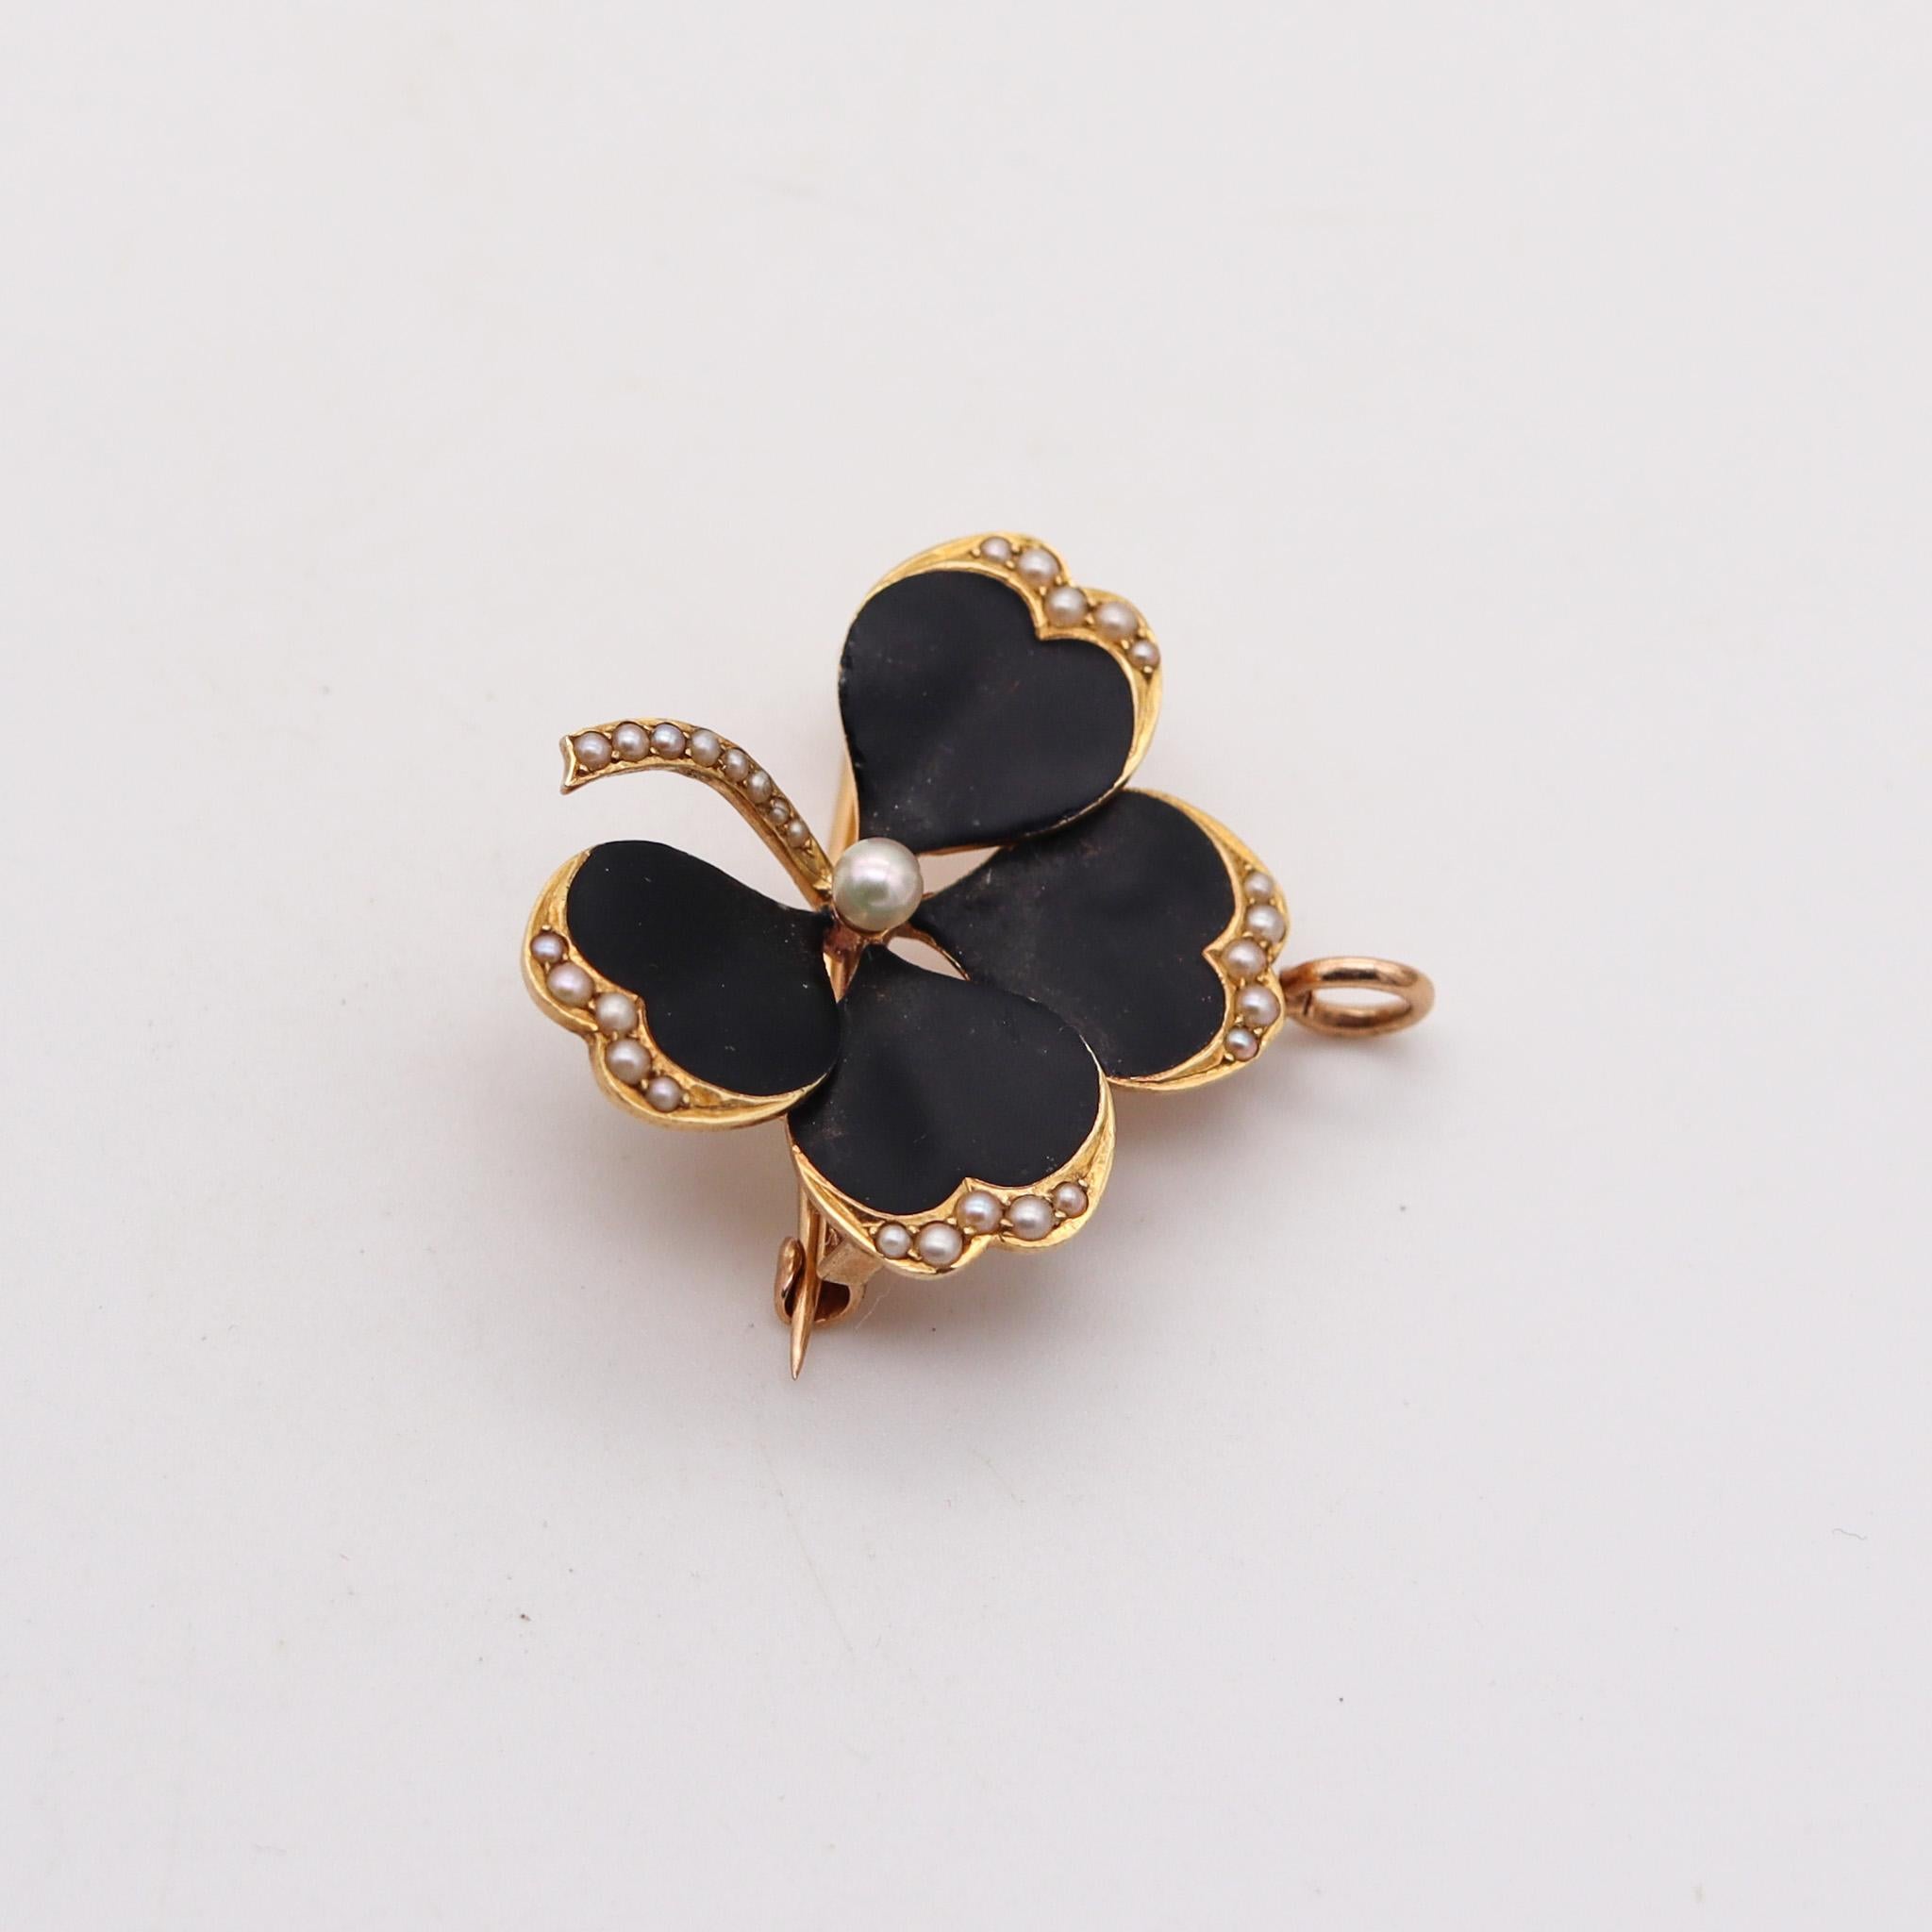 Edwardian convertible flower brooch designed by Crane & Theurer.

Beautiful and unusual clover, created in America during the Edwardian and the Art Nouveau periods, back in the 1905. This convertible pendant-brooch has been designed by the jewelry